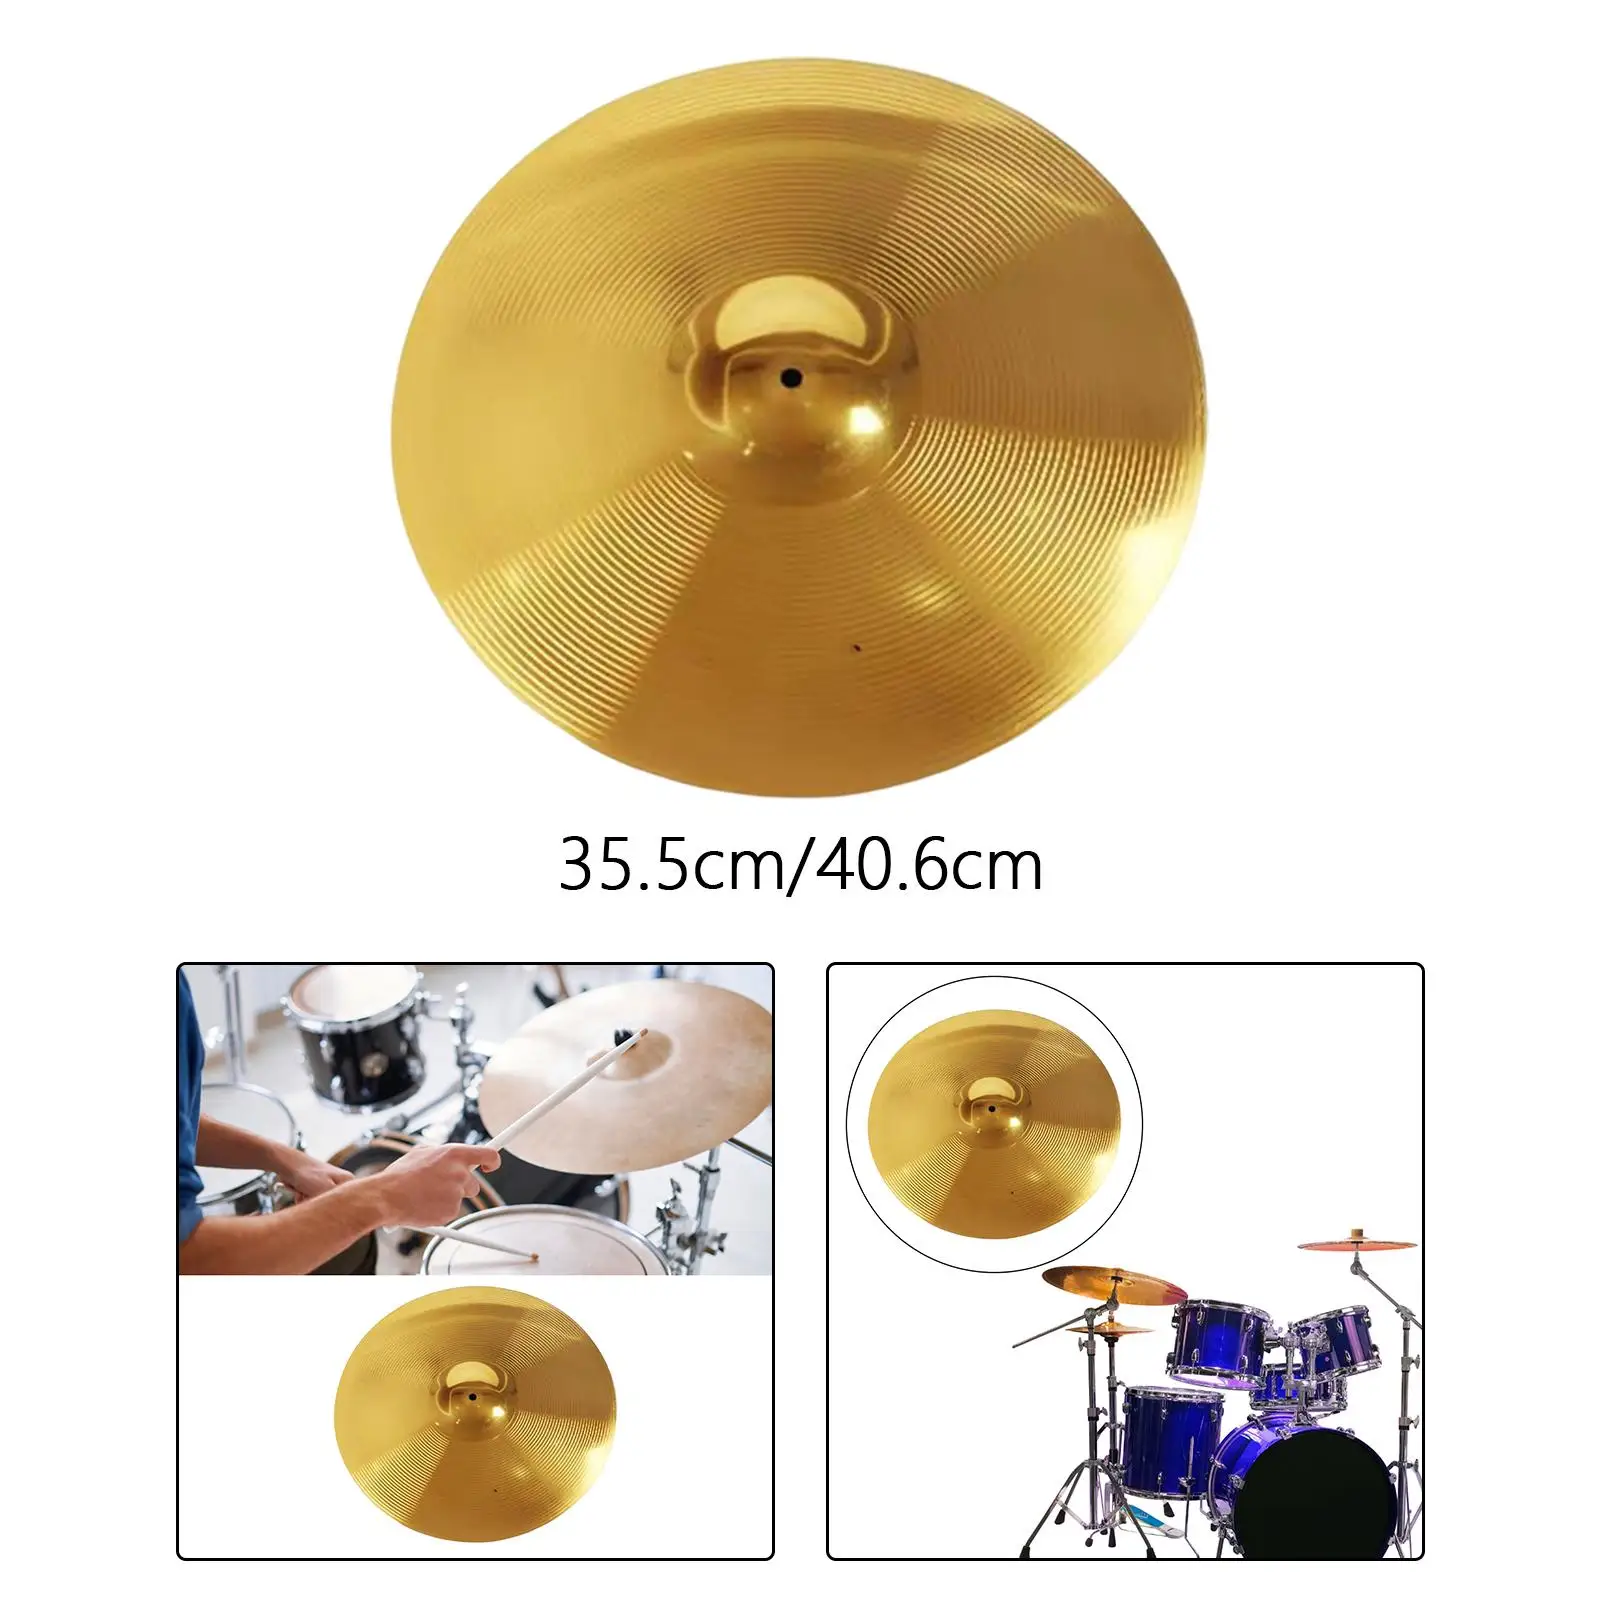 Brass Drum Cymbals Accessory Performance Stage Accessory Professional Replacements Replacements Cymbals Crash for Drum Set